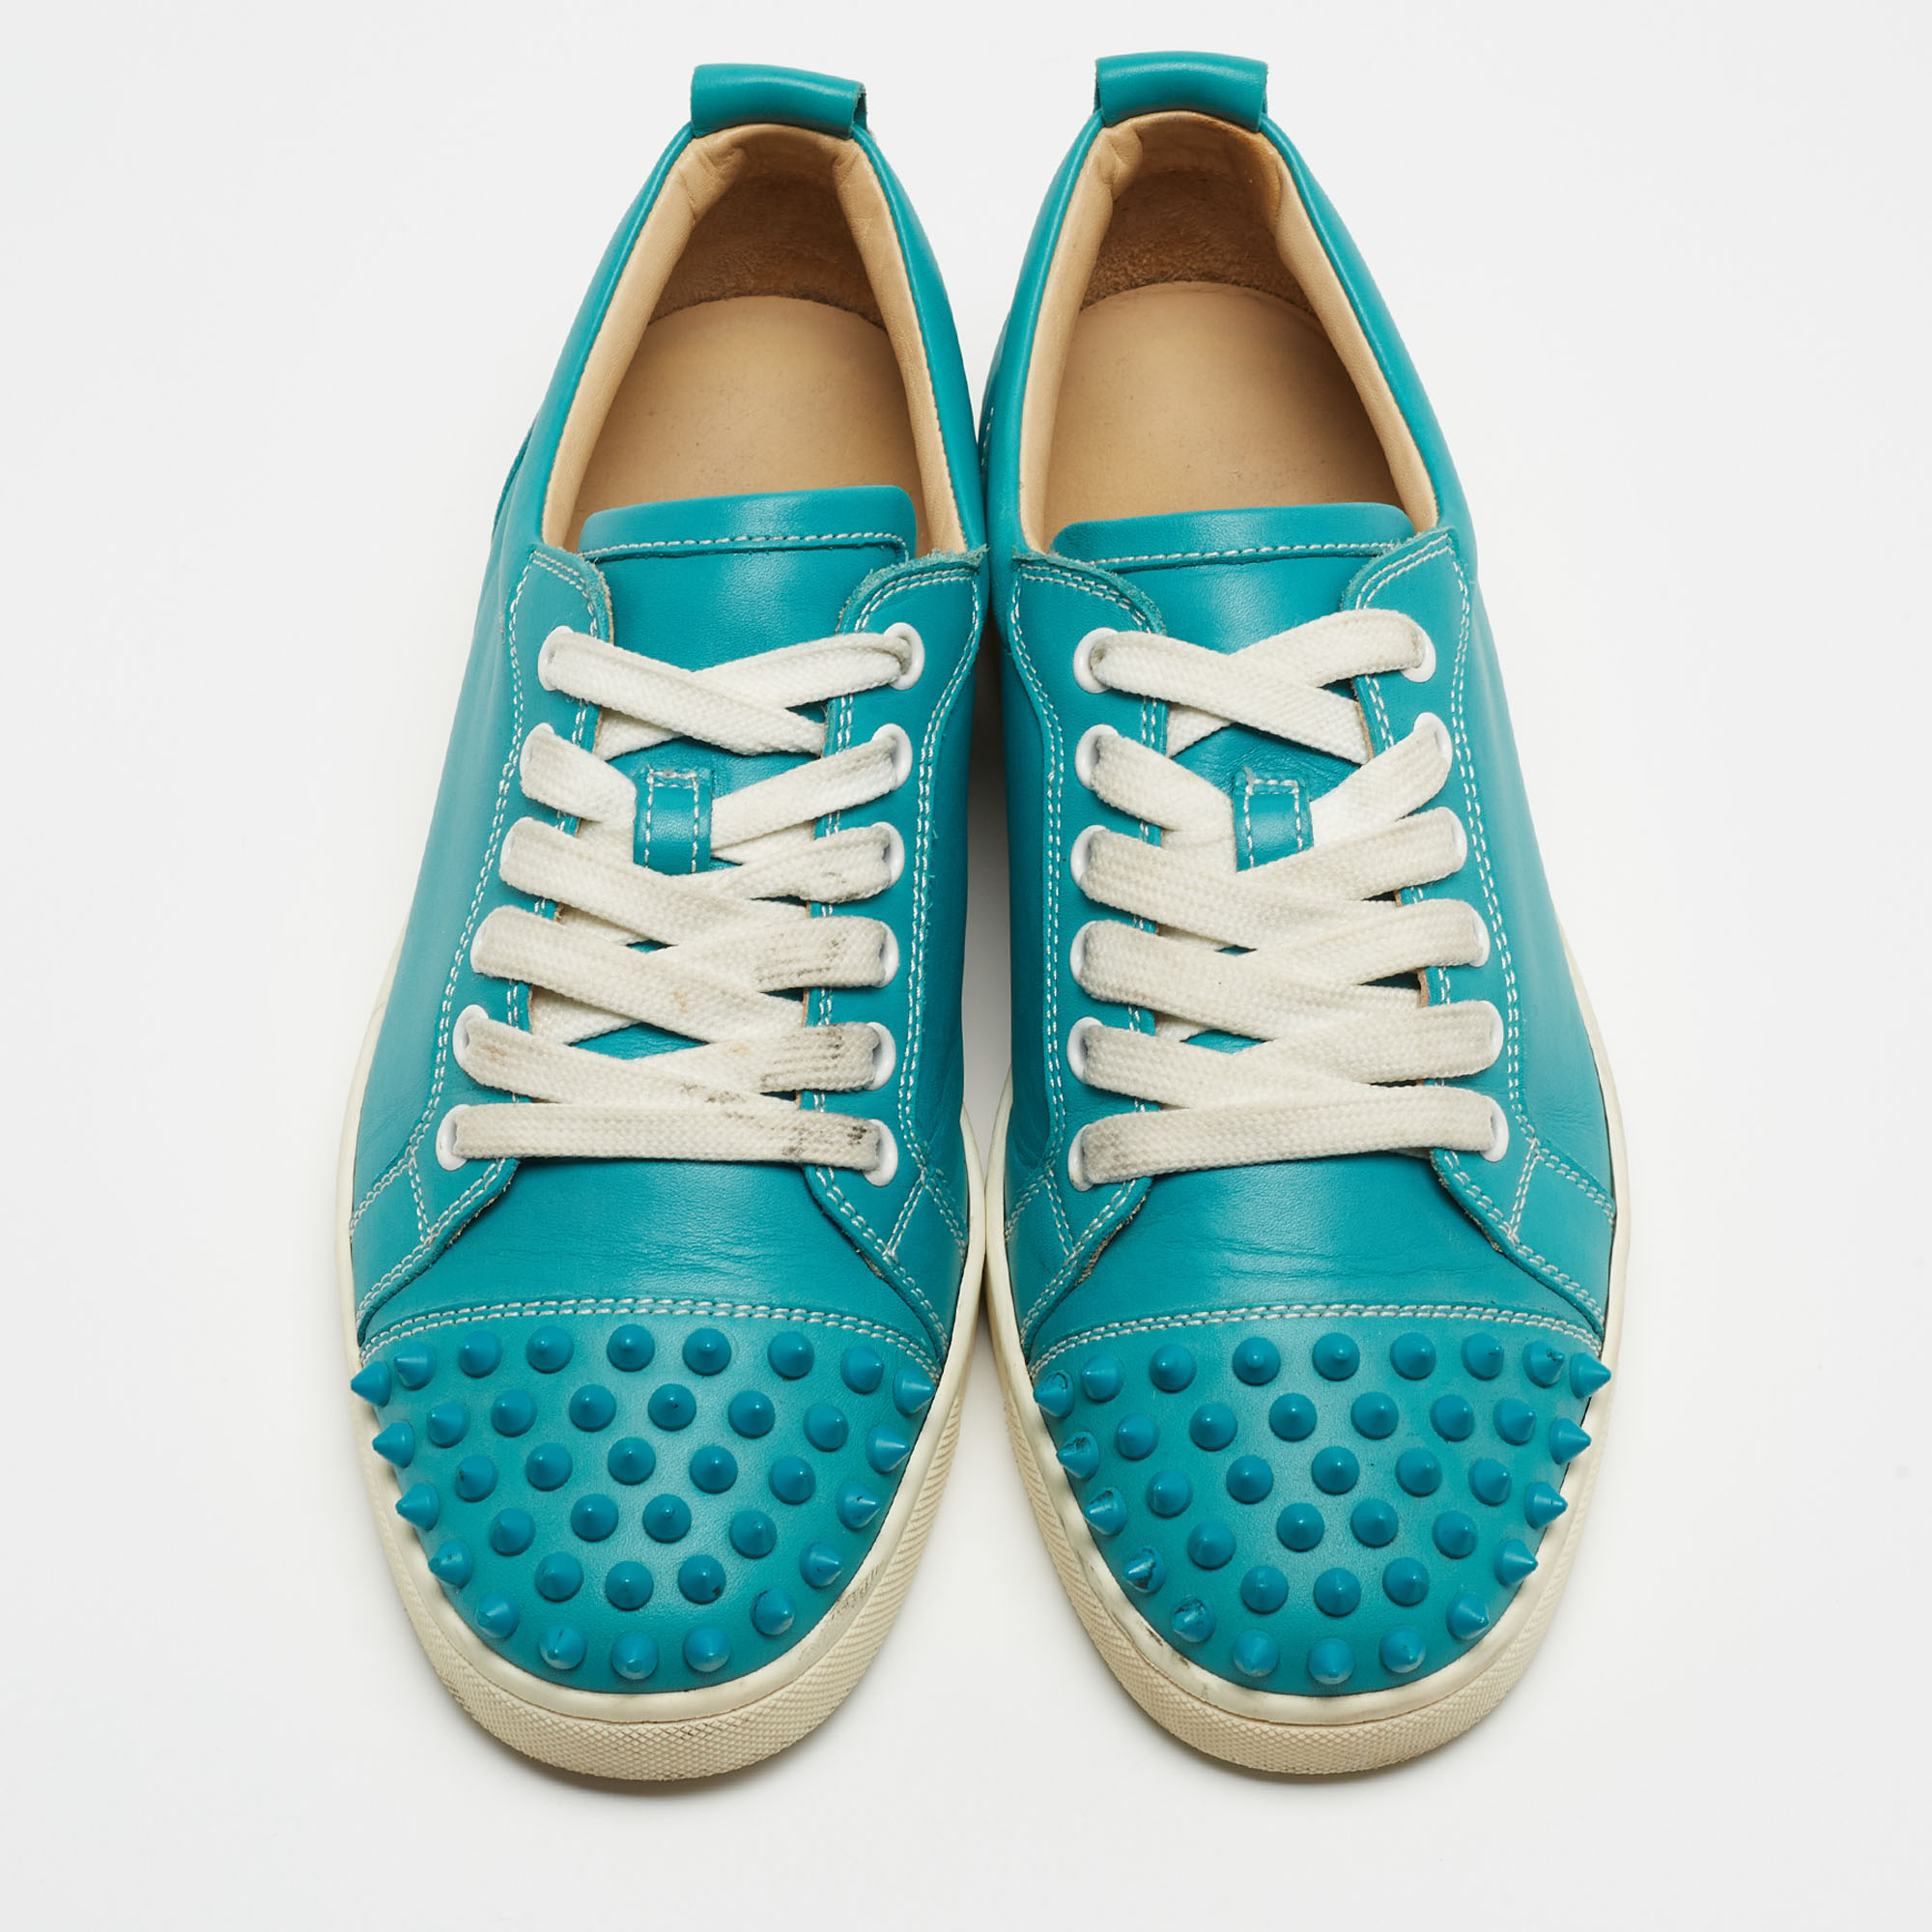 Christian Louboutin Turquoise Leather Louis Junior Spikes Sneakers Size 38